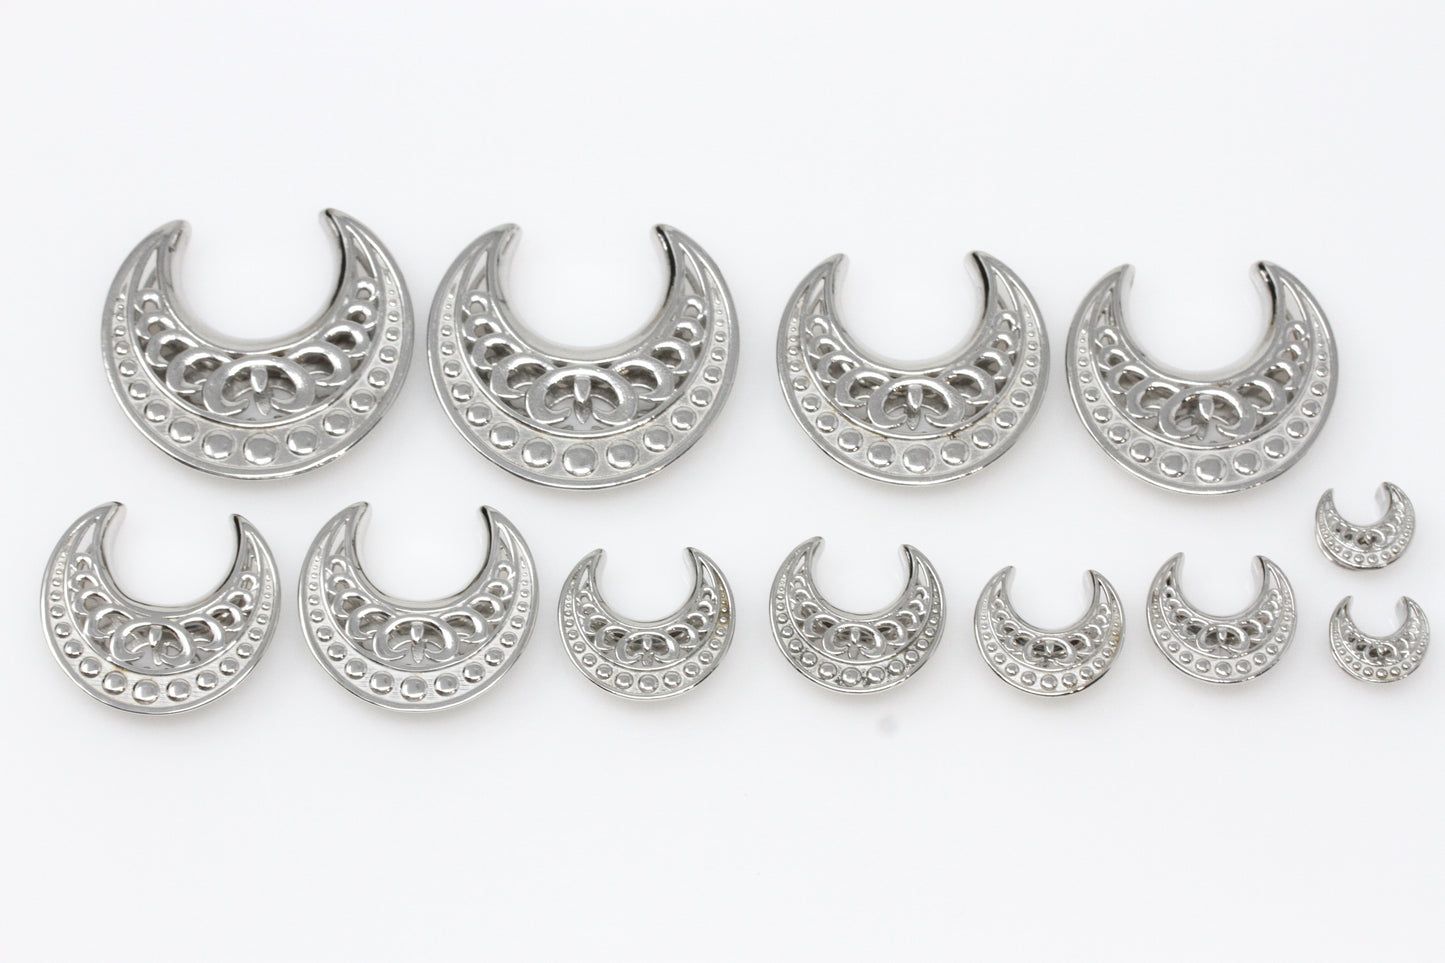 Stainless steel moon saddles